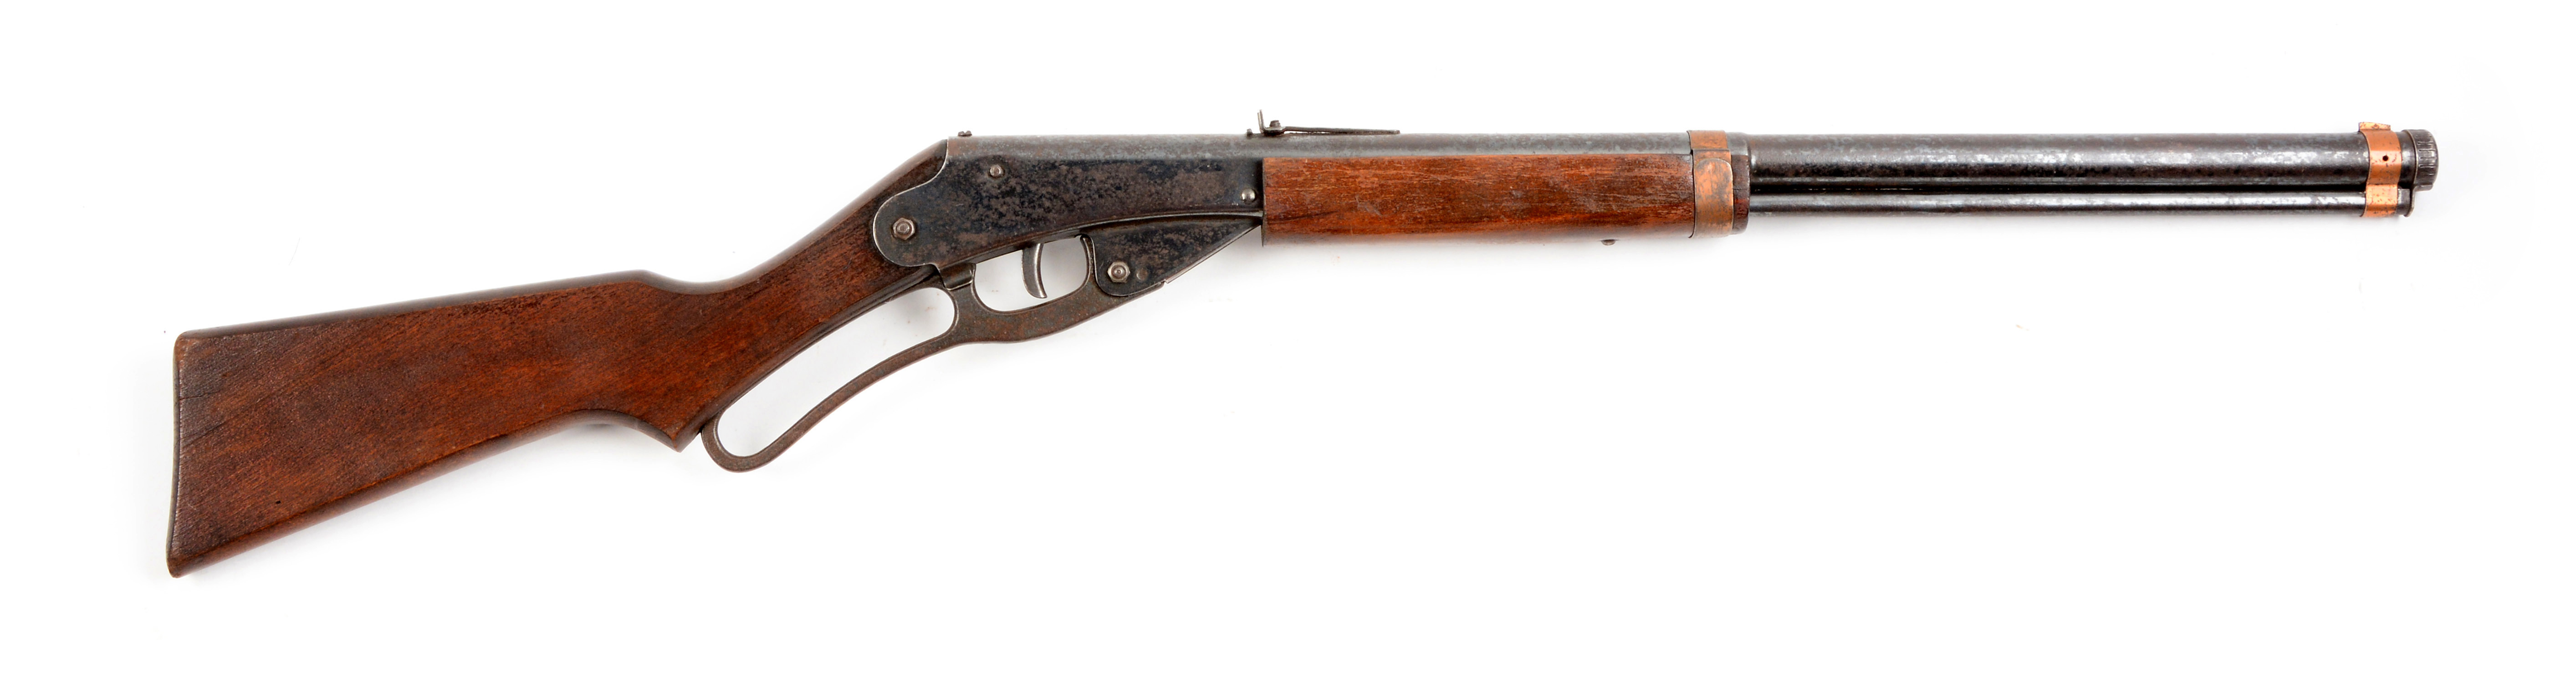 King Red Ryder Prototype, estimated at $1,800-2,100.